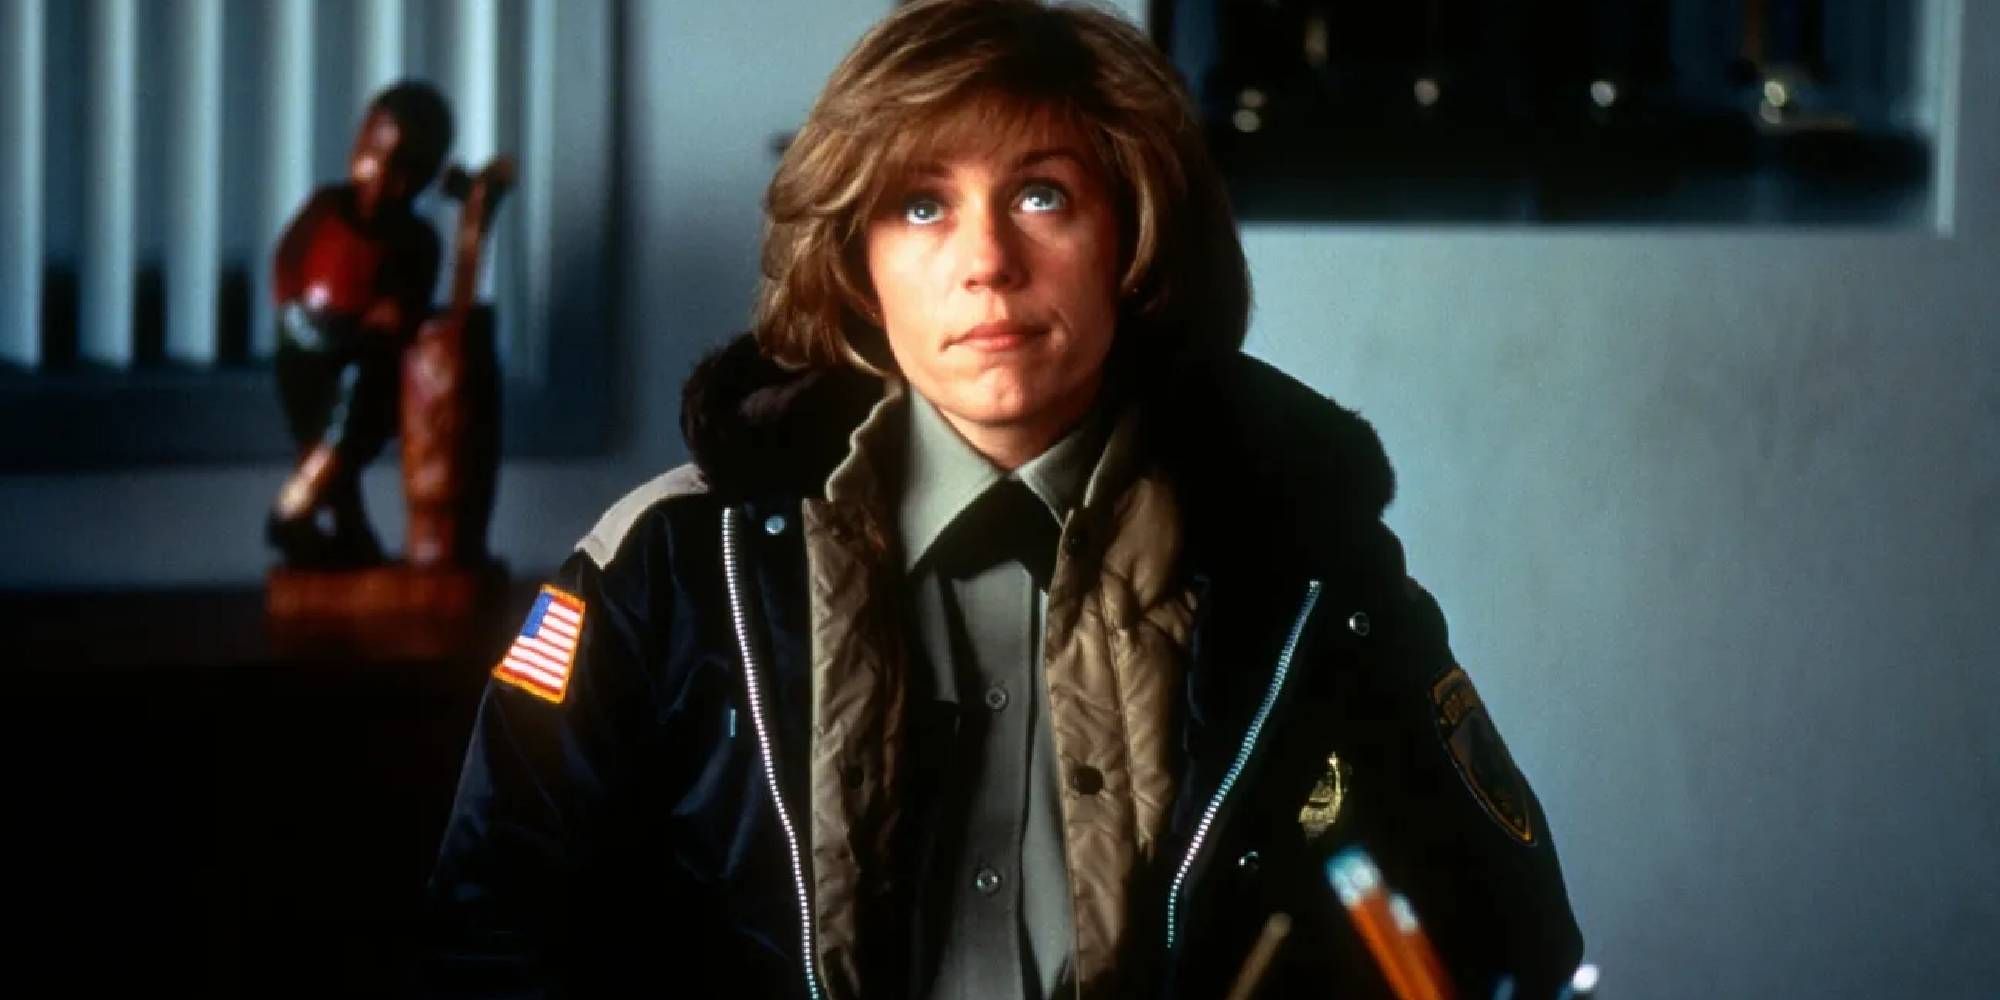 Frances McDormand as Marge looking up in Fargo.